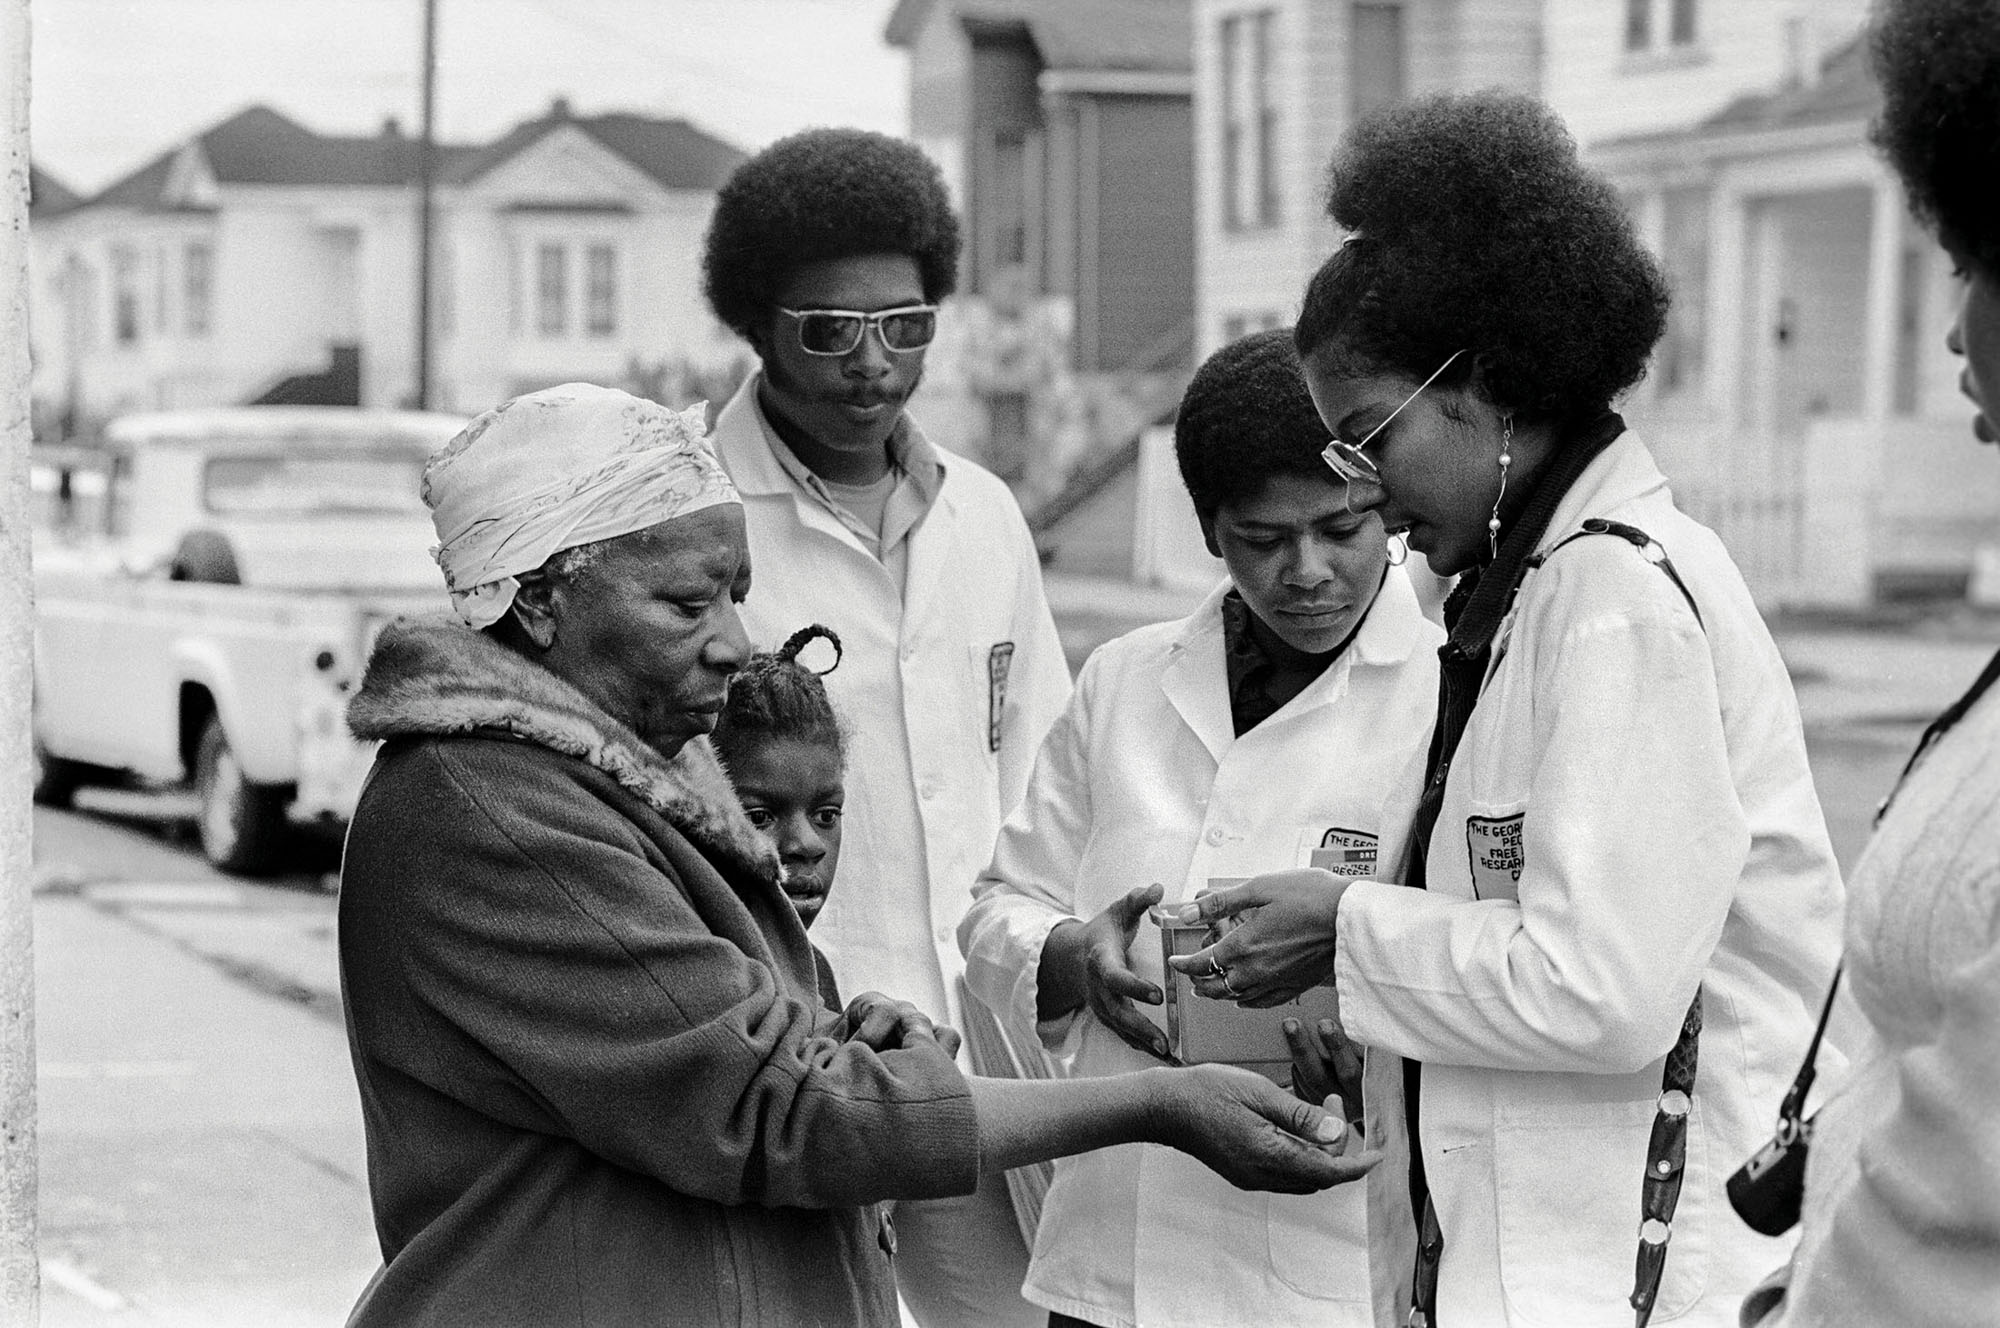 1973 - Oakland, California: Adrienne Humphrey, Sickle cell anemia testing during Bobby Seale